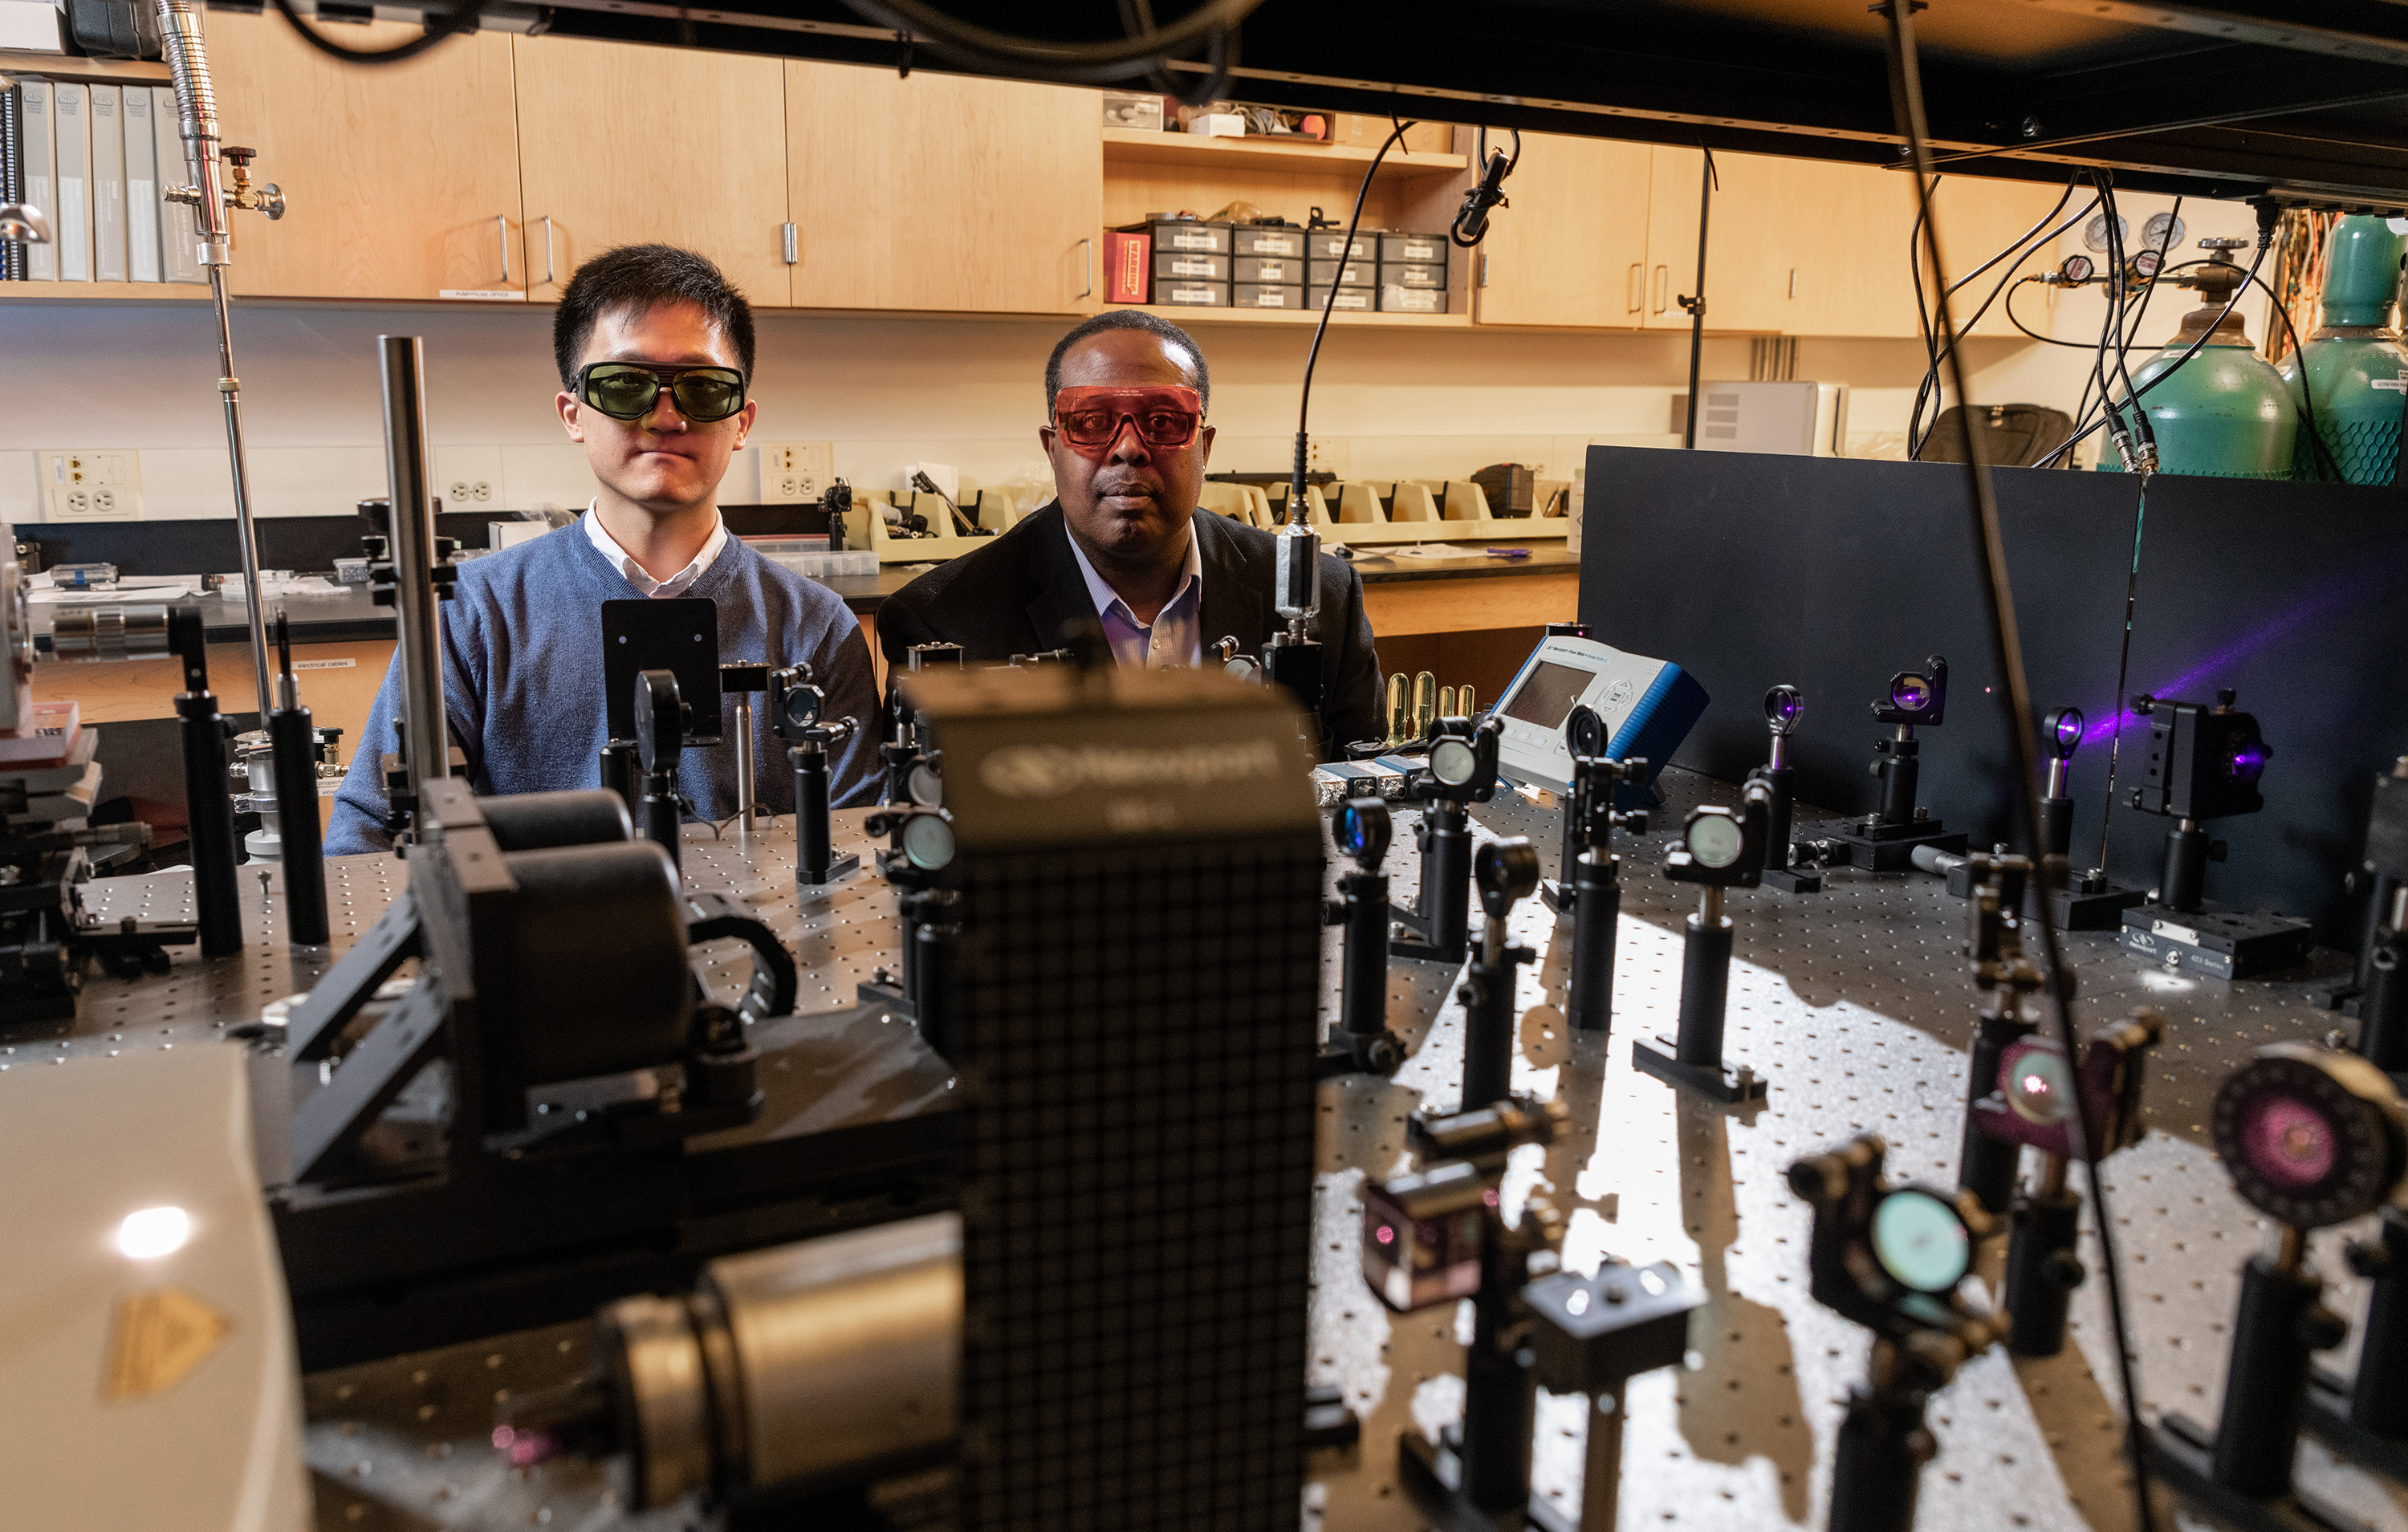 Researchers Cheng Zhe and Samuel Graham shown with an optical test setup for studying gallium nitride devices cooled by placement on a diamond substrate. (Credit: Rob Felt, Georgia Tech)